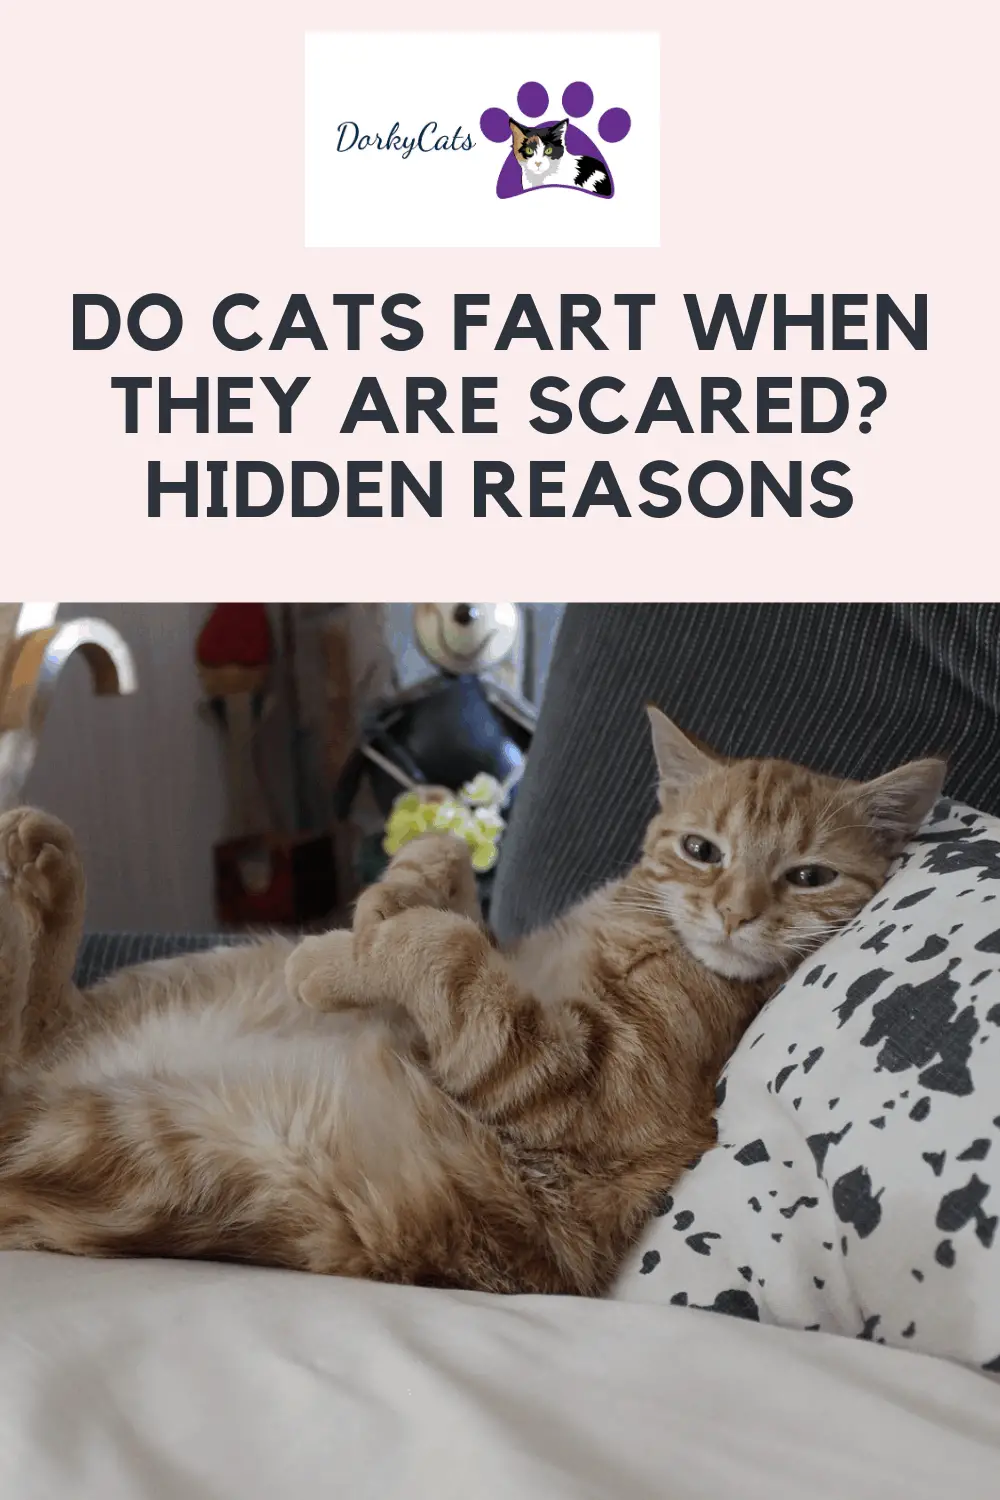 DO CATS FART WHEN THEY ARE SCARED? HIDDEN REASONS Dorkycats